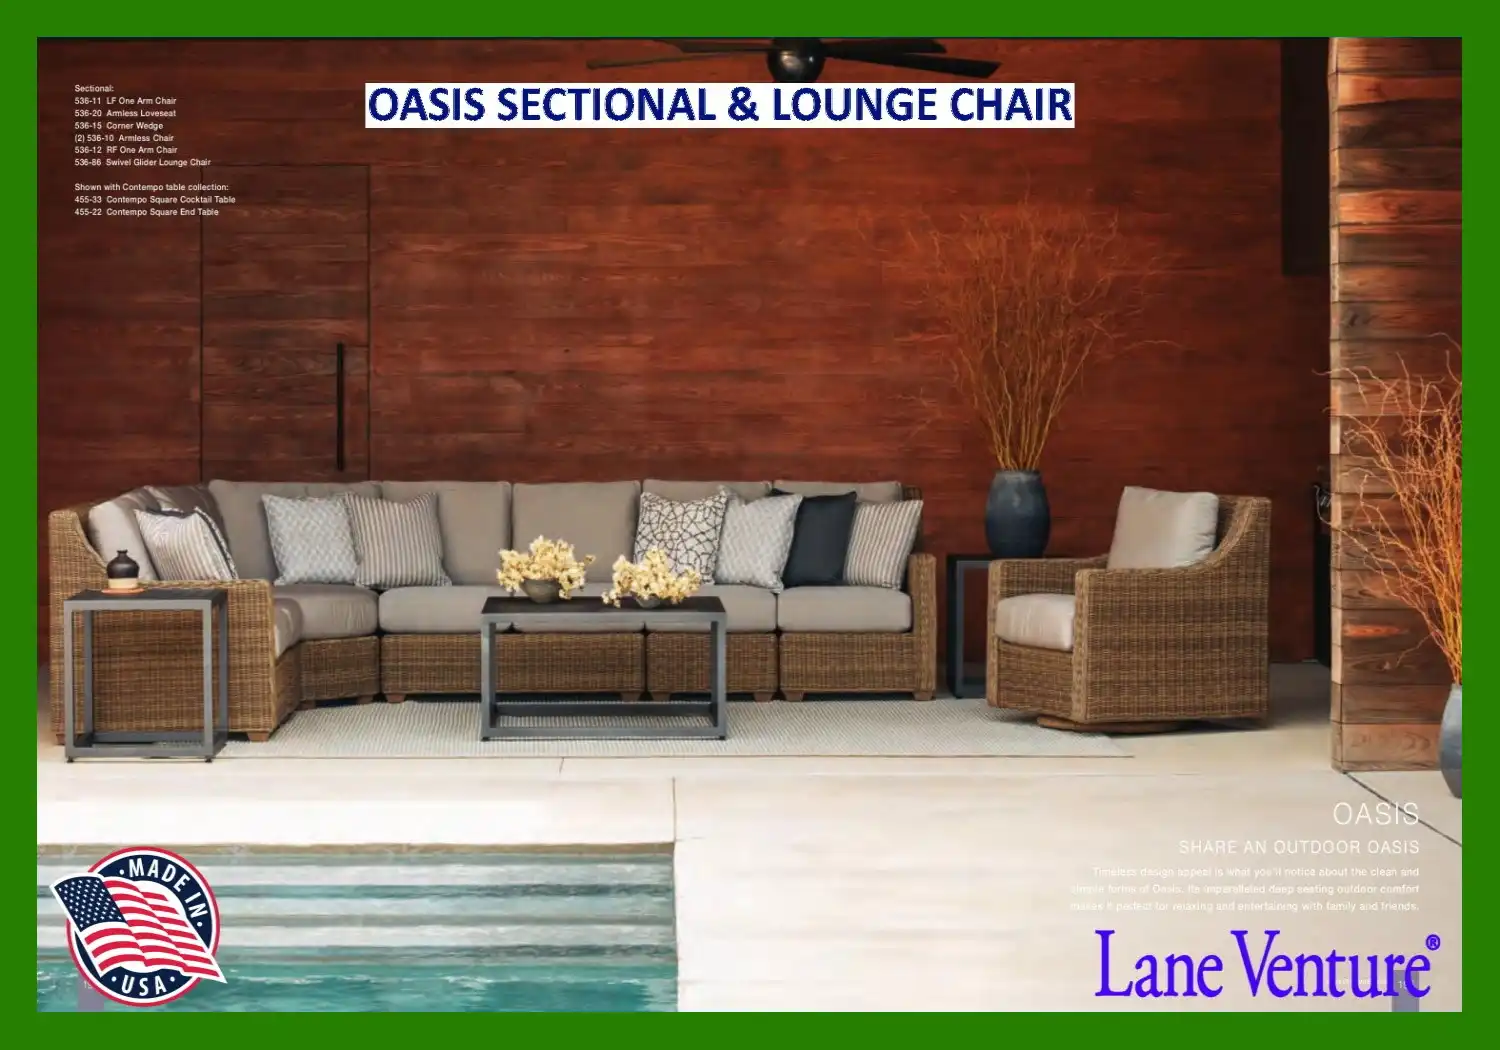 OASIS SECTIONAL & LOUNGE CHAIR